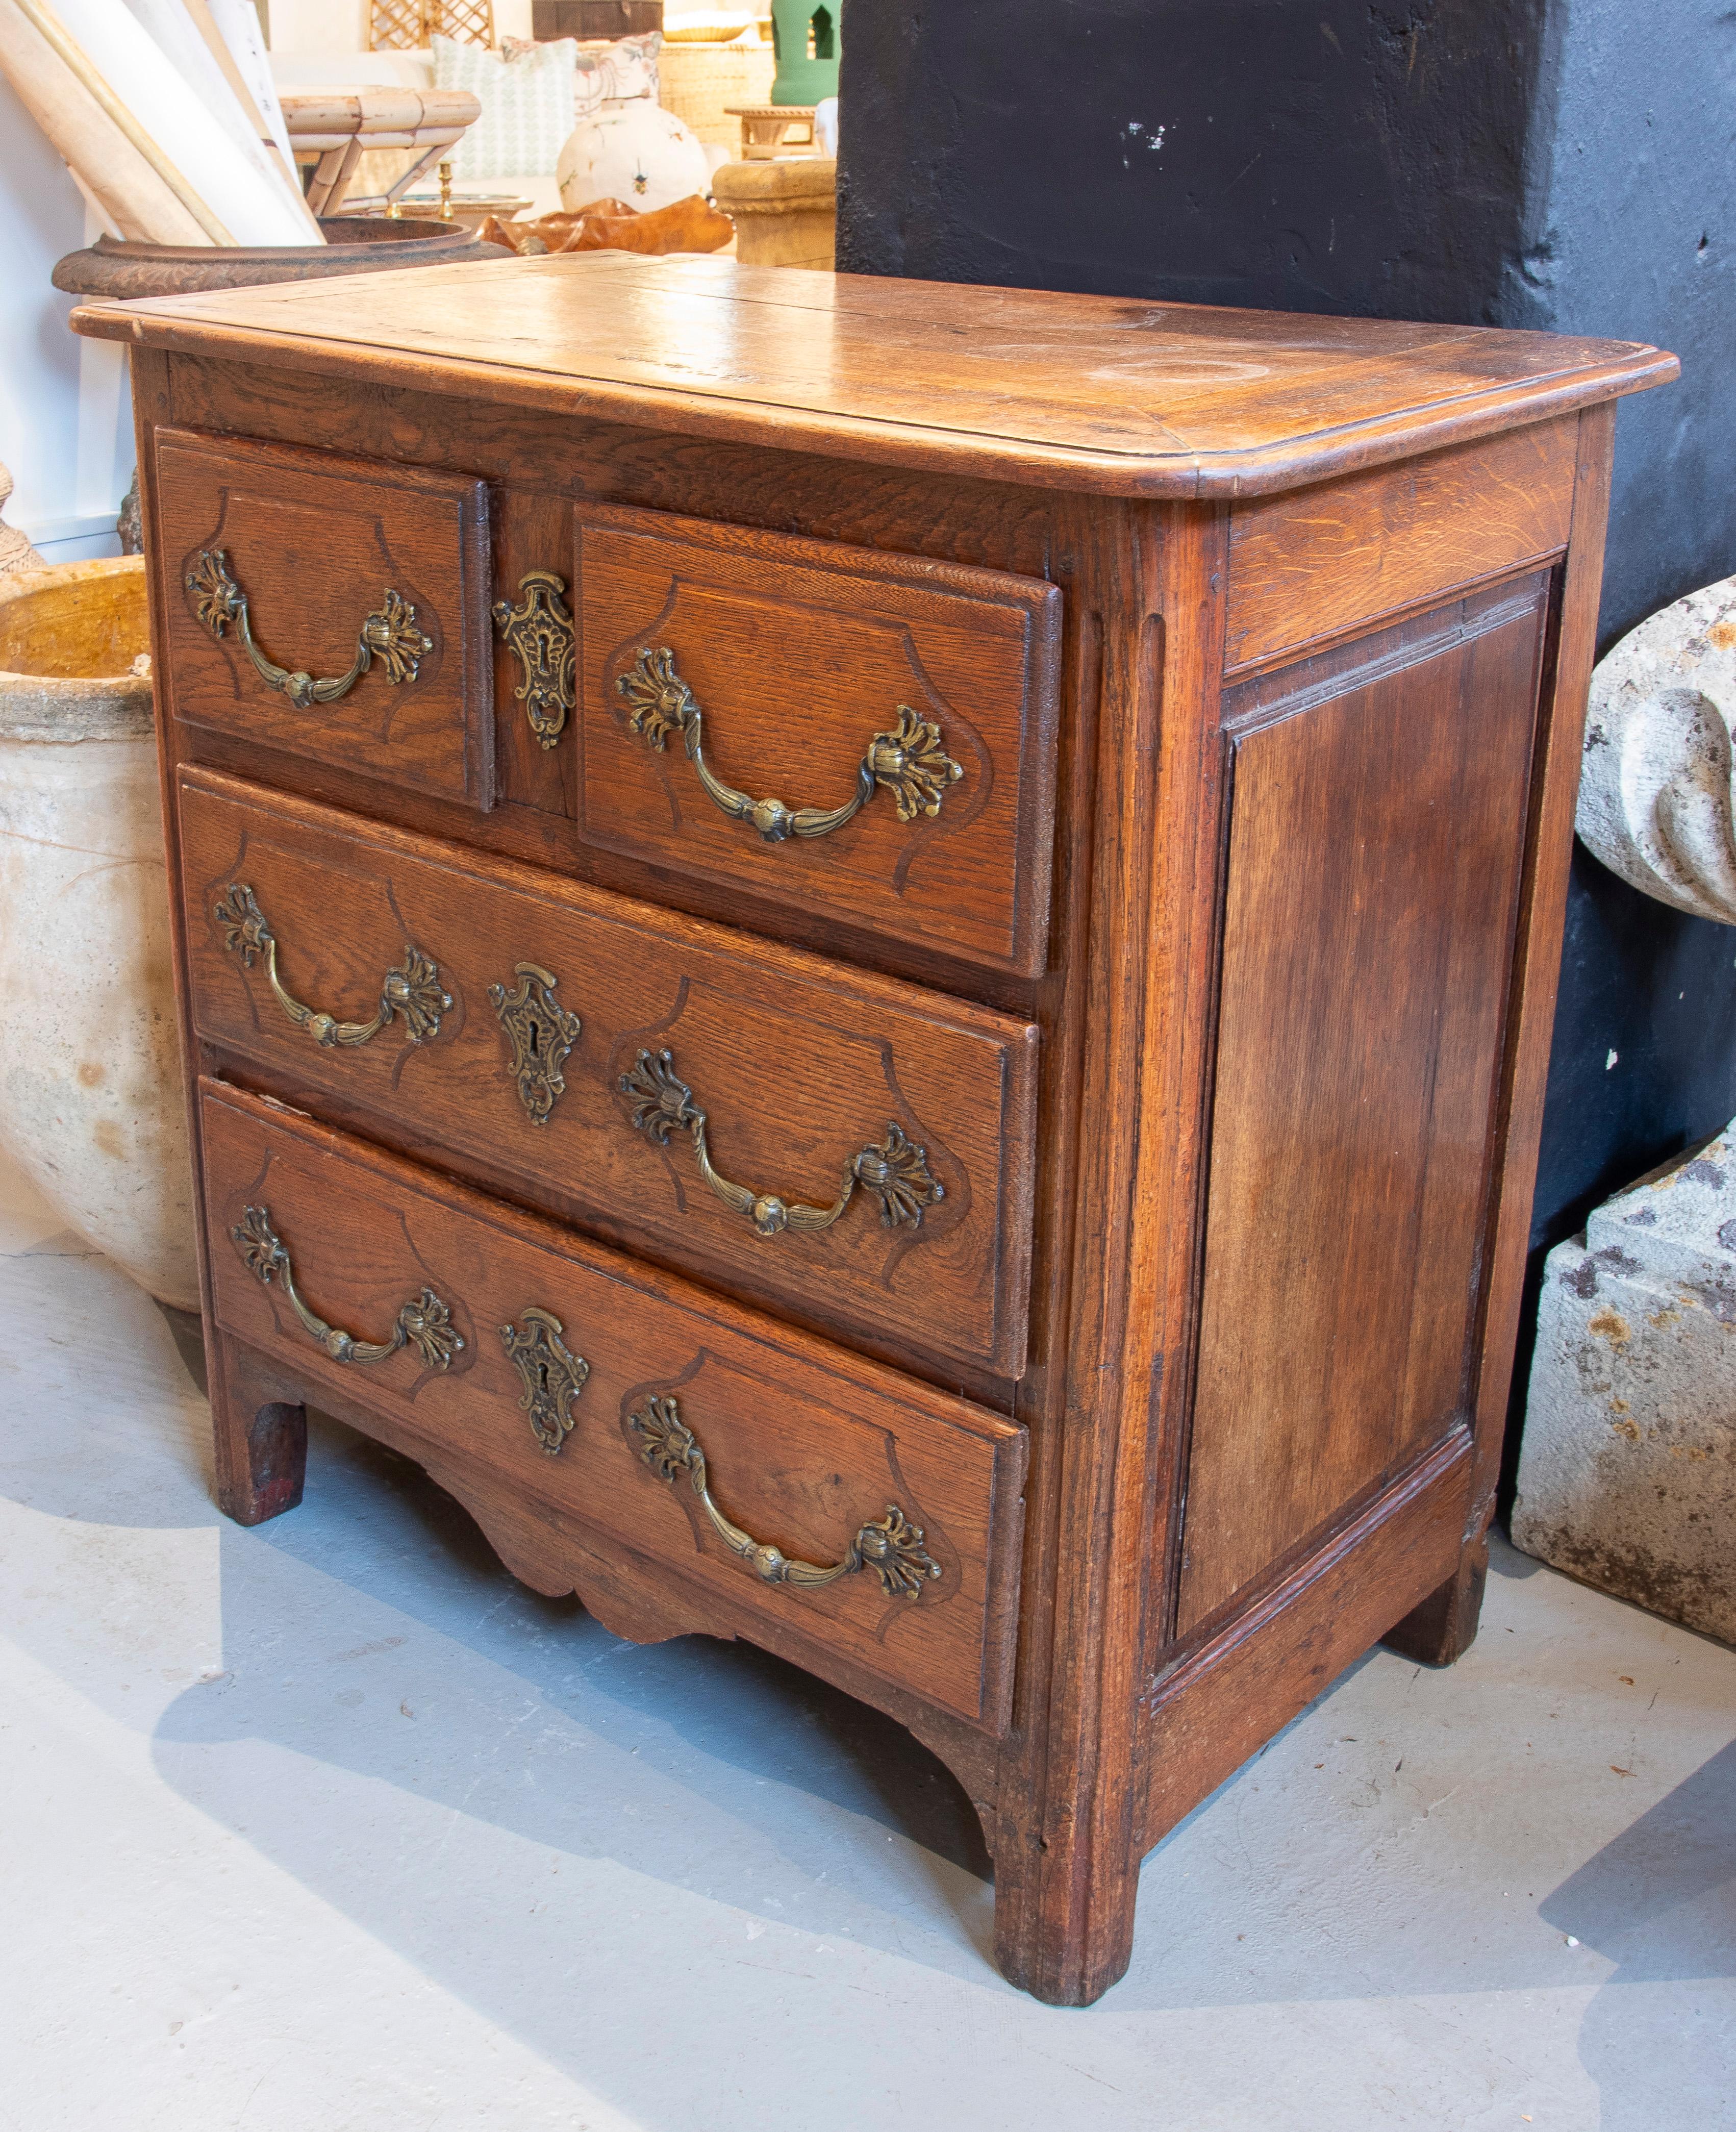 19th Century English Wooden Chest of Drawers with Three Drawers and Iron Fittings